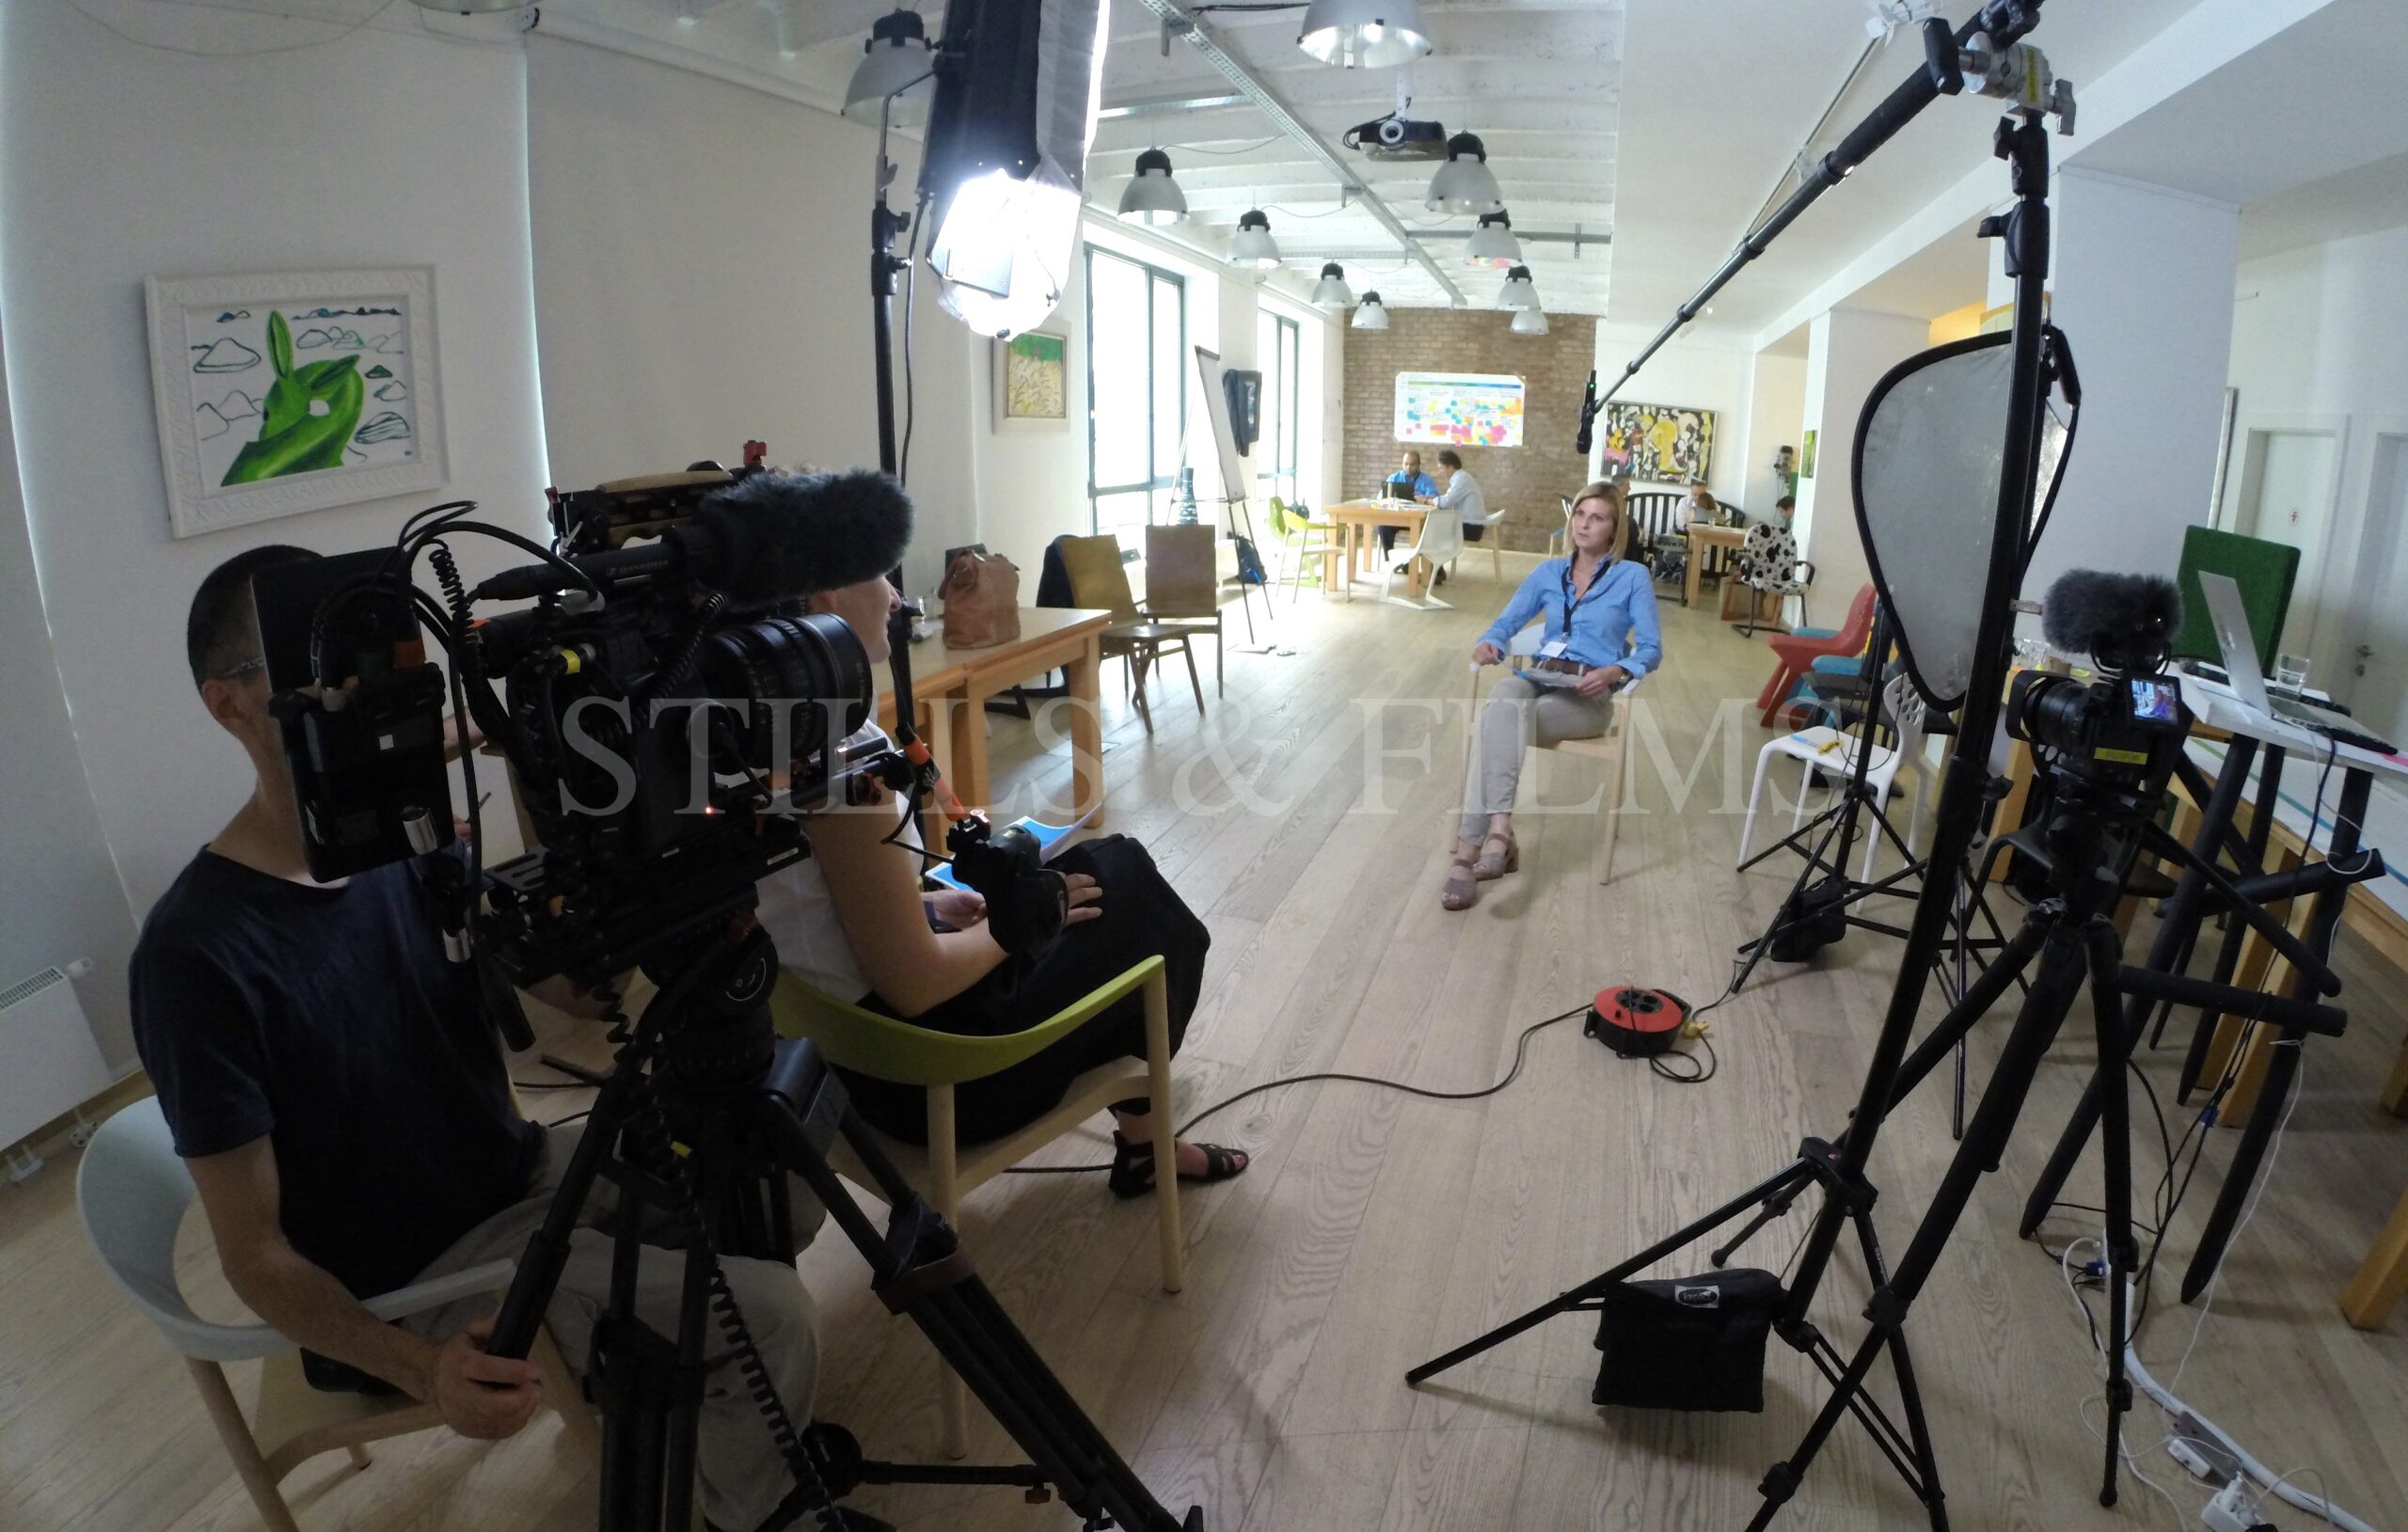 Our video crew in Vienna filming corporate interviews for McKinsey & Company, Inc. in Vienna, Austria